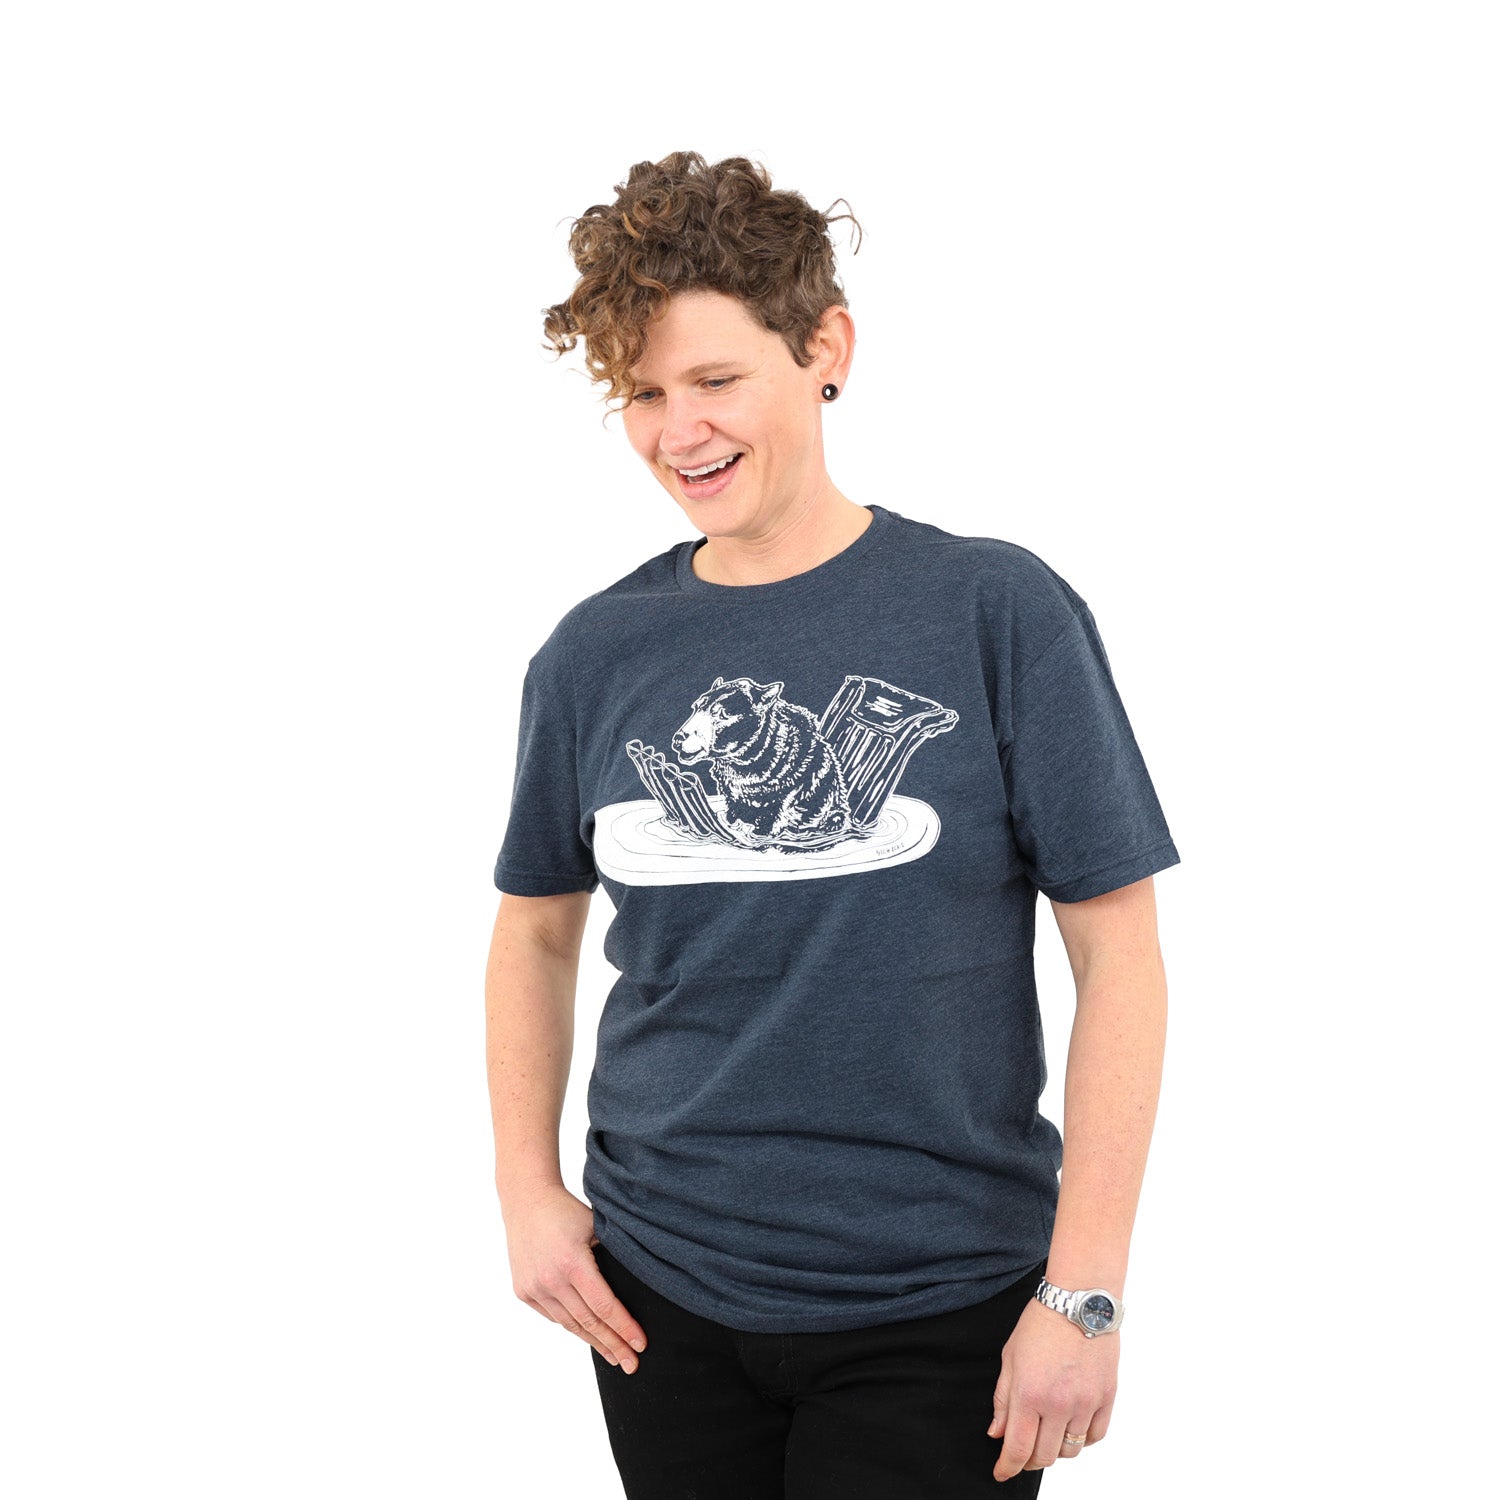 Woman with short curly hair wearing a blue t shirt screen printed with a bear sitting on a floatie in the water. 